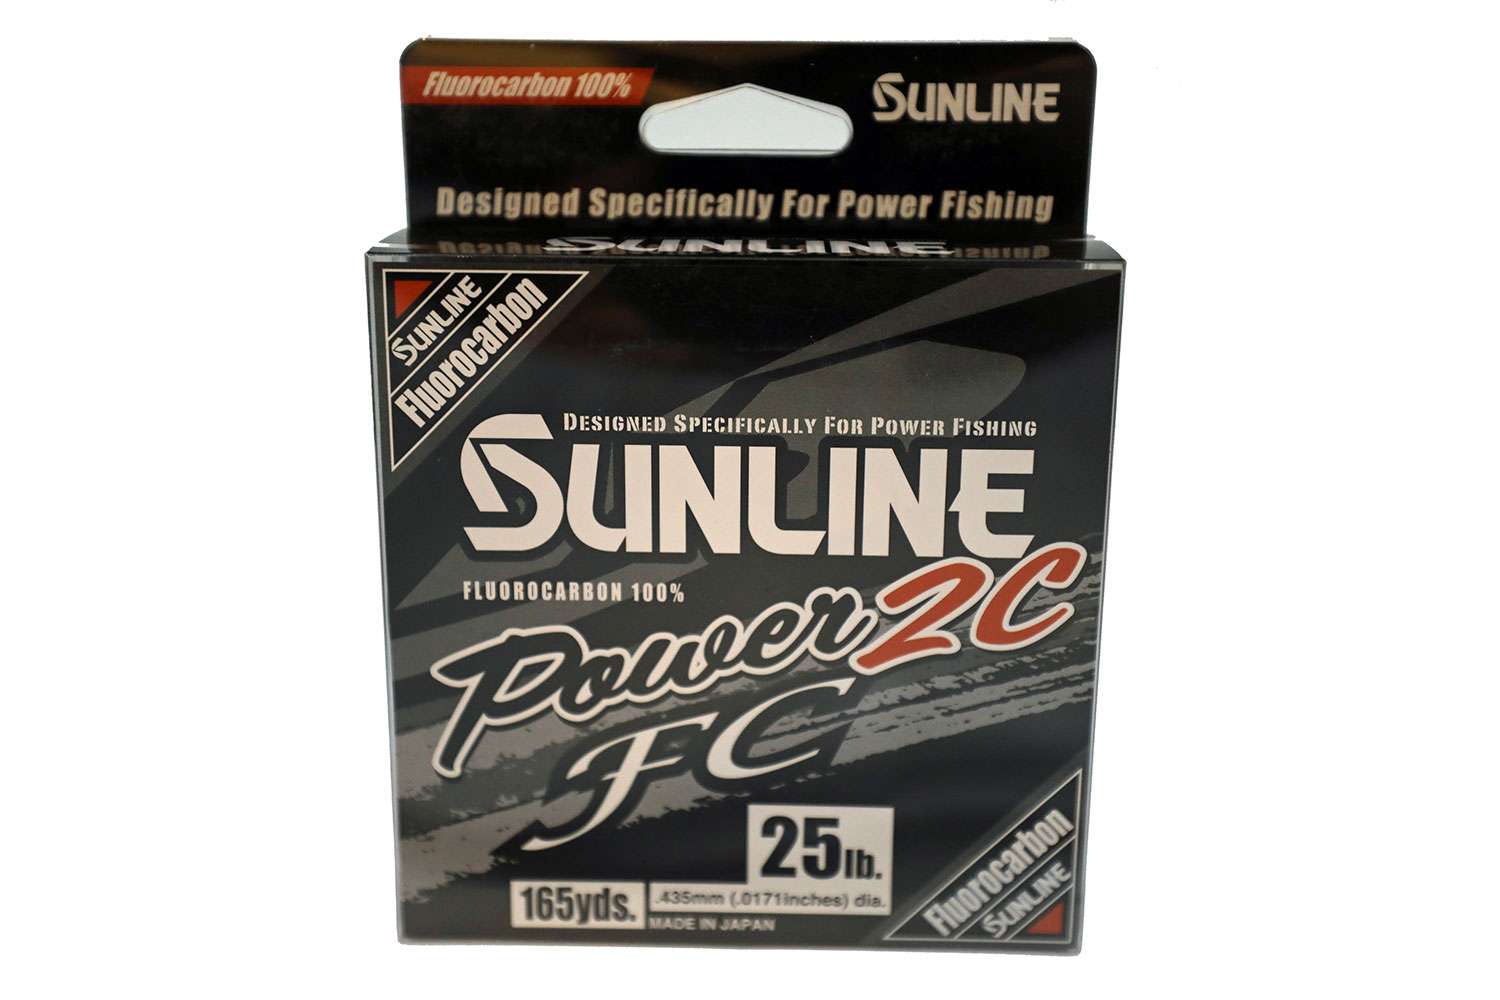    <B> Sunline Power2C FC</B>
<BR>Sunline is introducing a new power fishing with insight from pro angler Jason Christie called Power2C FC. Christie specifically designed Power2C FC to take the sudden shock of short lined jarring hooksets to move bass out of the deepest of cover. Developed from a 100-percent fluorocarbon line formula Power2C FC is made to have a high abrasion resistance, lower stretch, greater sensitivity and take what any power fisherman can hand out day in and day out. For added line watching visibility Power2C FC features a repeating section of 12-inch high-visibility orange line marking followed by 48-inch section of clear line. It will be available in the following sizes 18-, 20-, 22- and 25-pound tests, and comes in 165-yard spool size.
<BR>
<B>MSRP: $33.99 - $35.99 </B>
